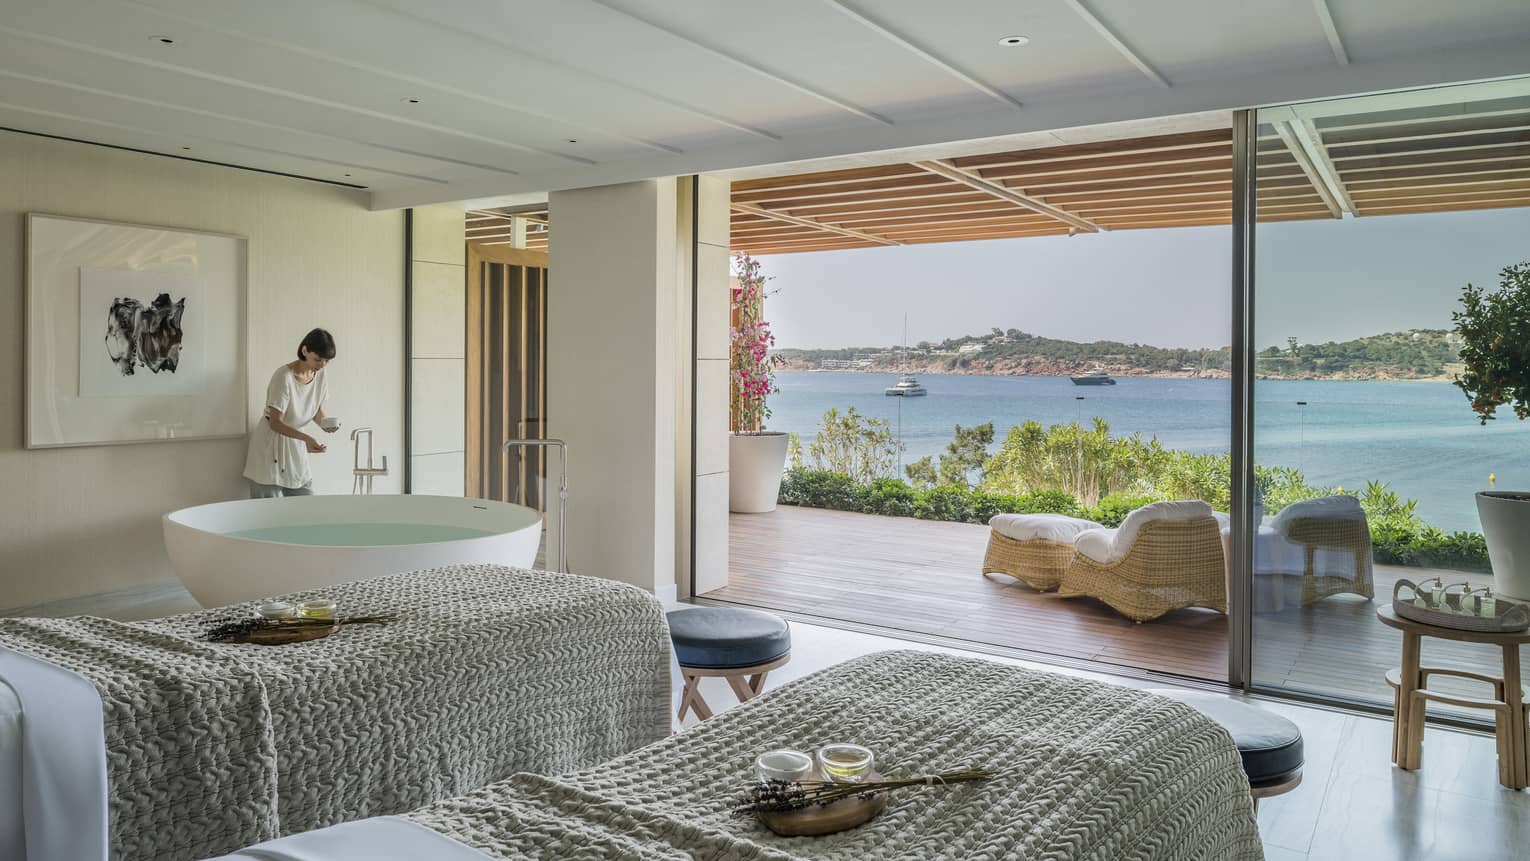 A four seasons staff works in a room with two side by side spa tables draped with gray linens face an open veranda overlooking a body of water in Greece